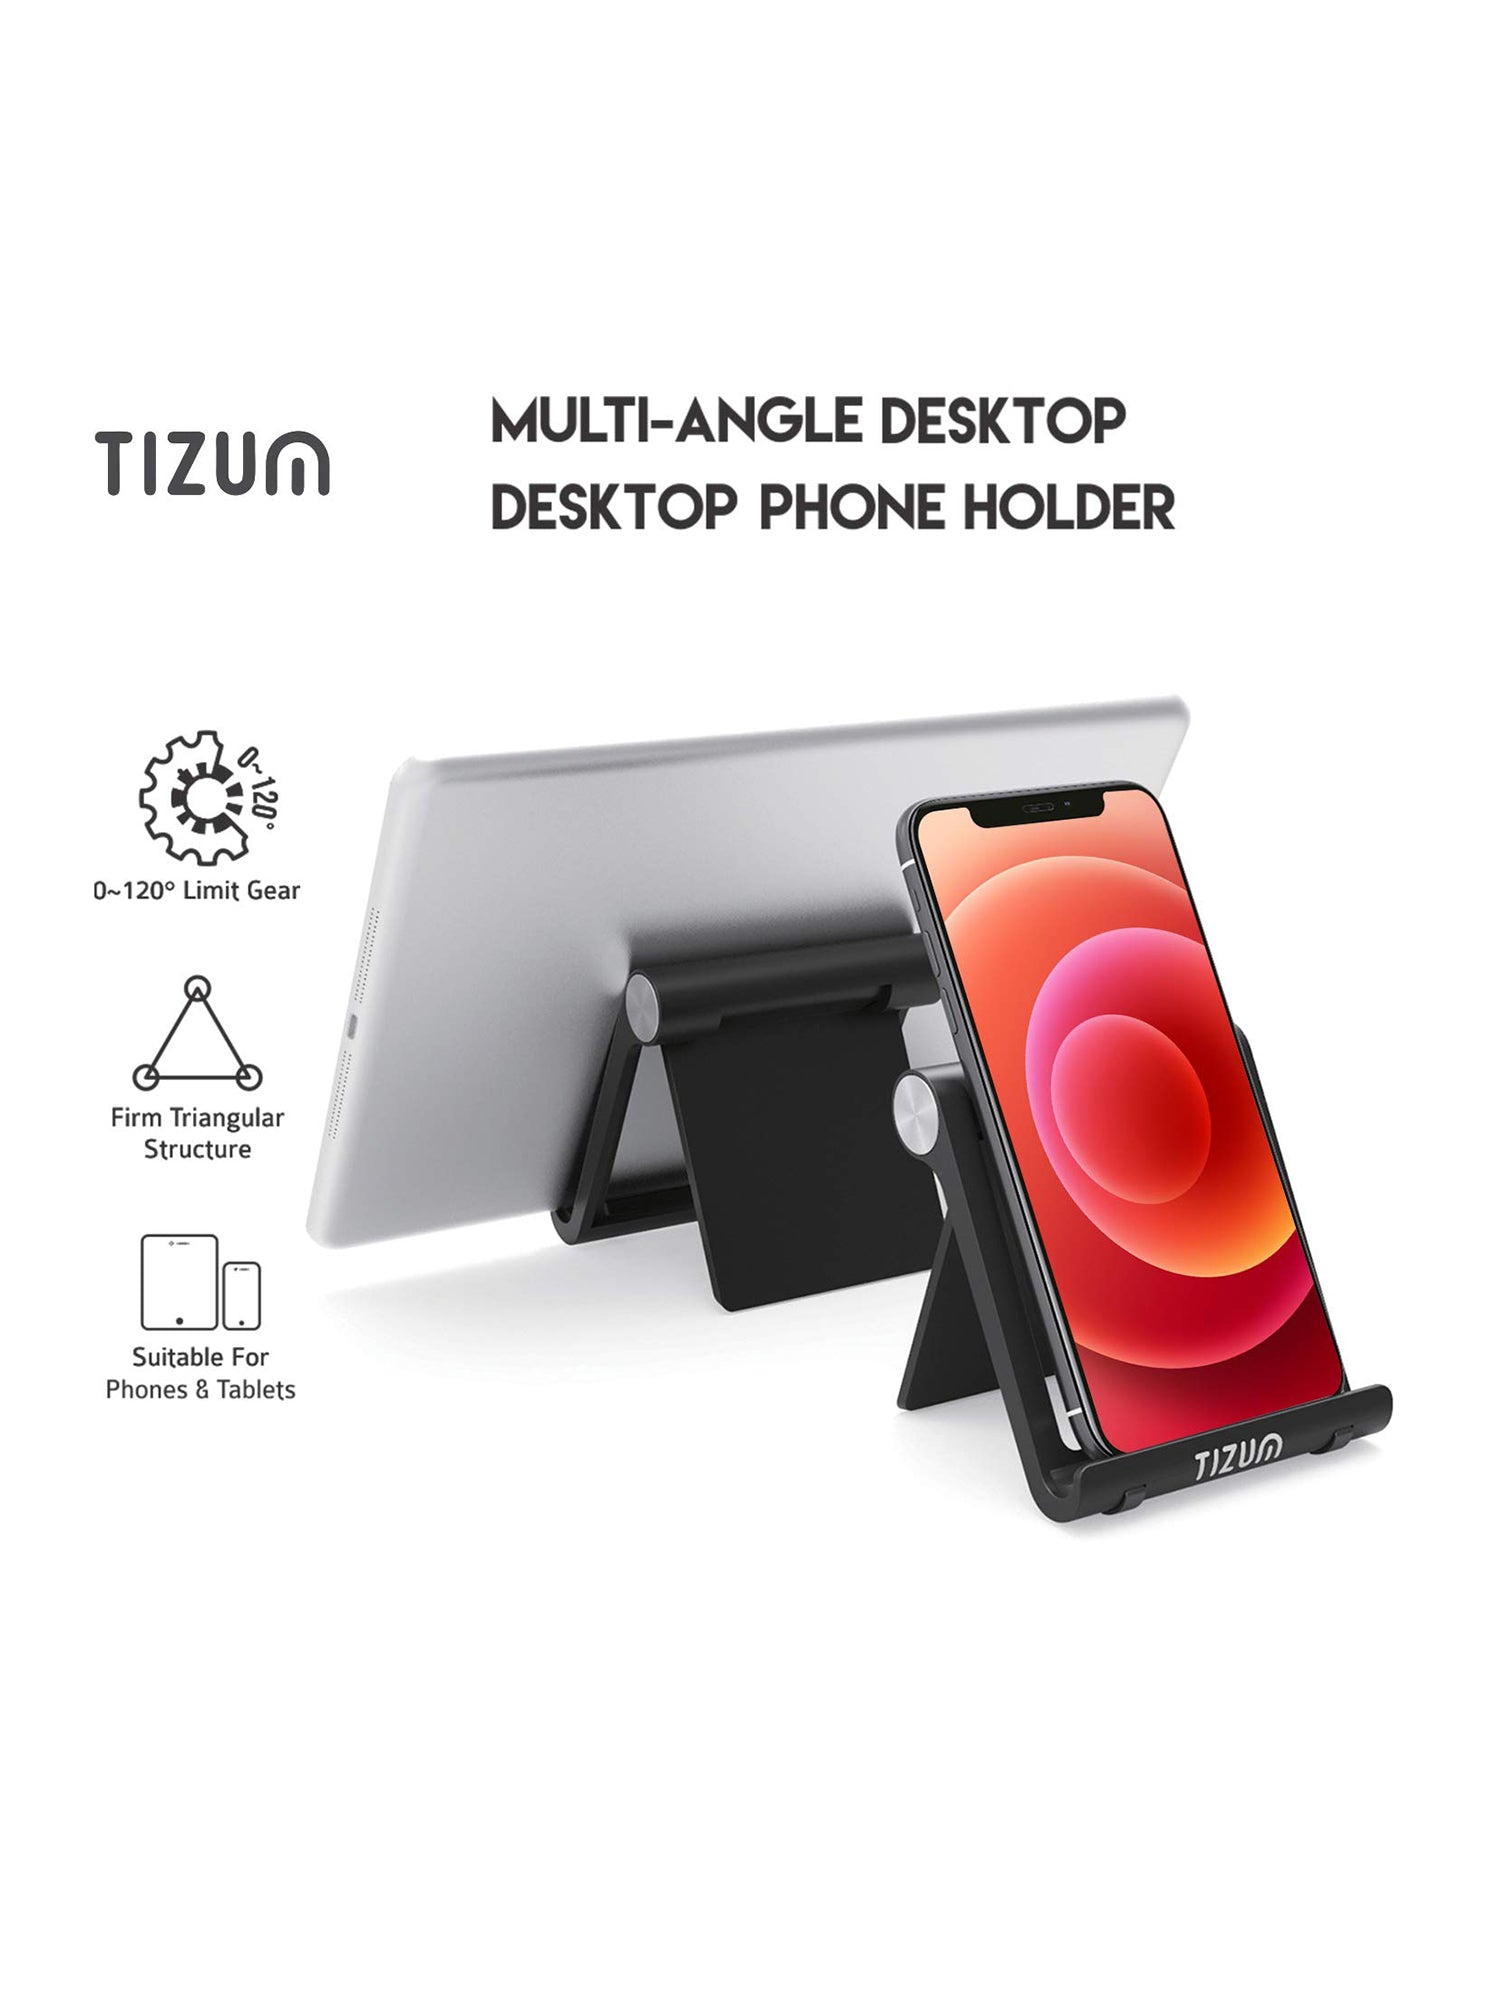 Foldable Tablet/Mobile Phone Stand Holder with Angle adjustments, Anti-Slip Pads